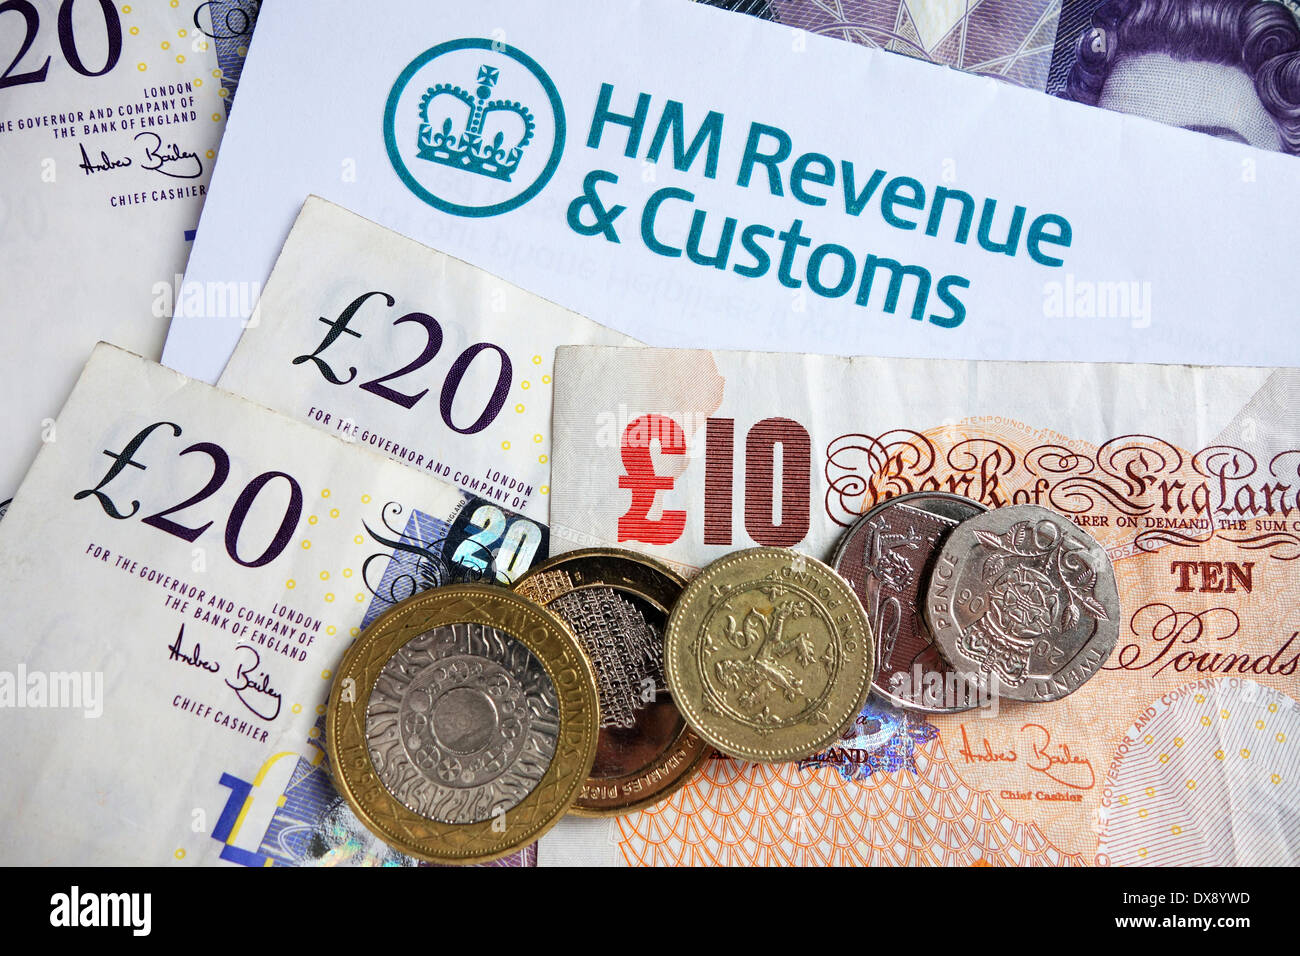 HMRC form and coins Stock Photo